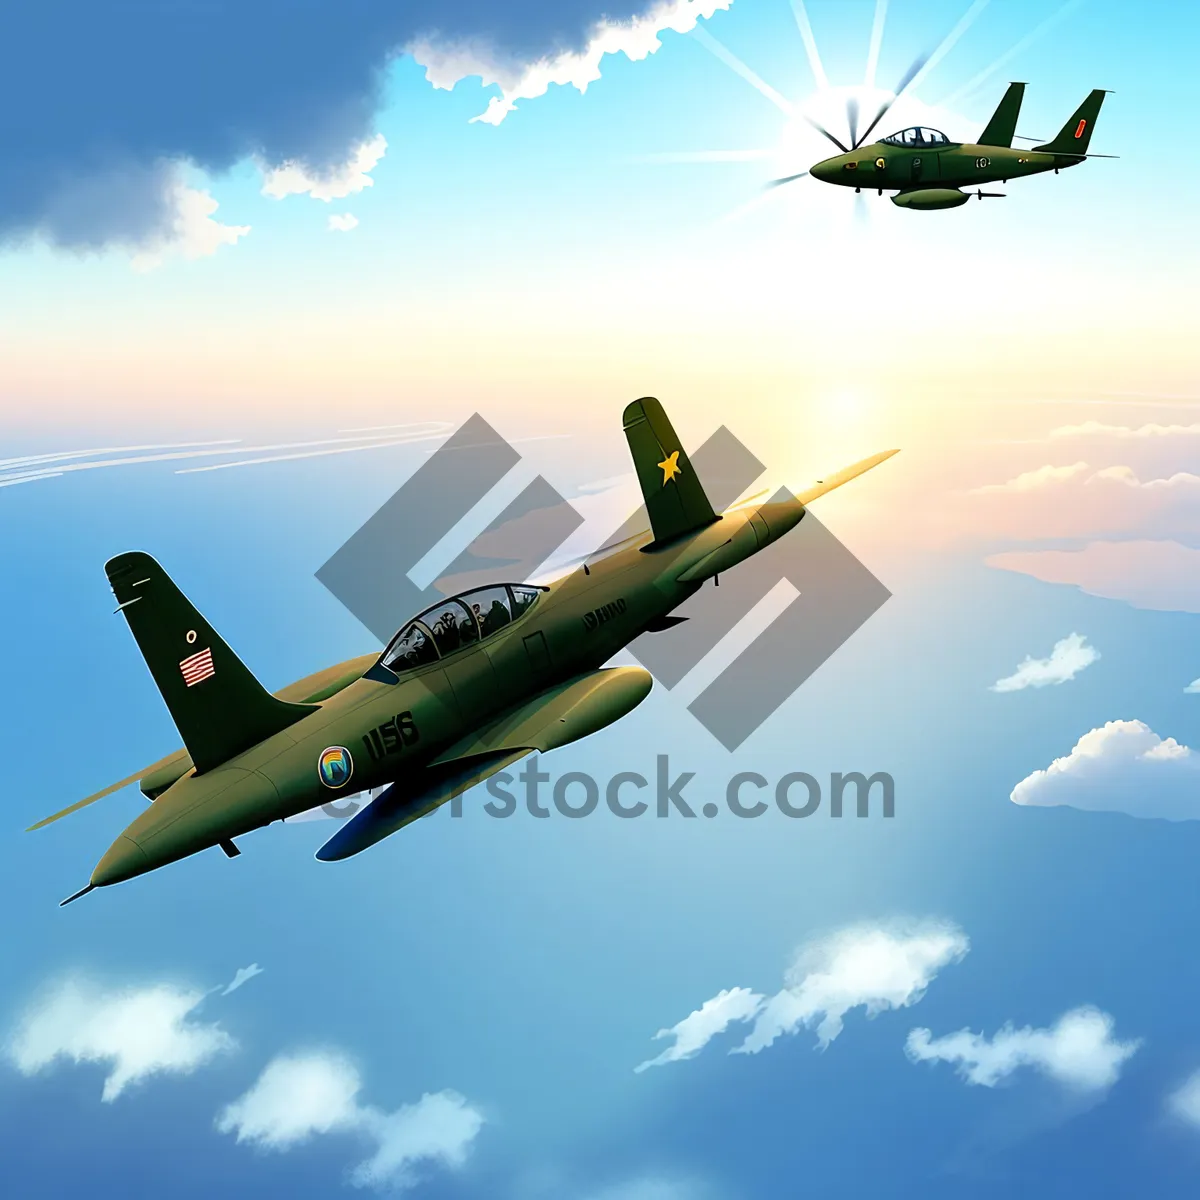 Picture of Jet Aircraft in Flight